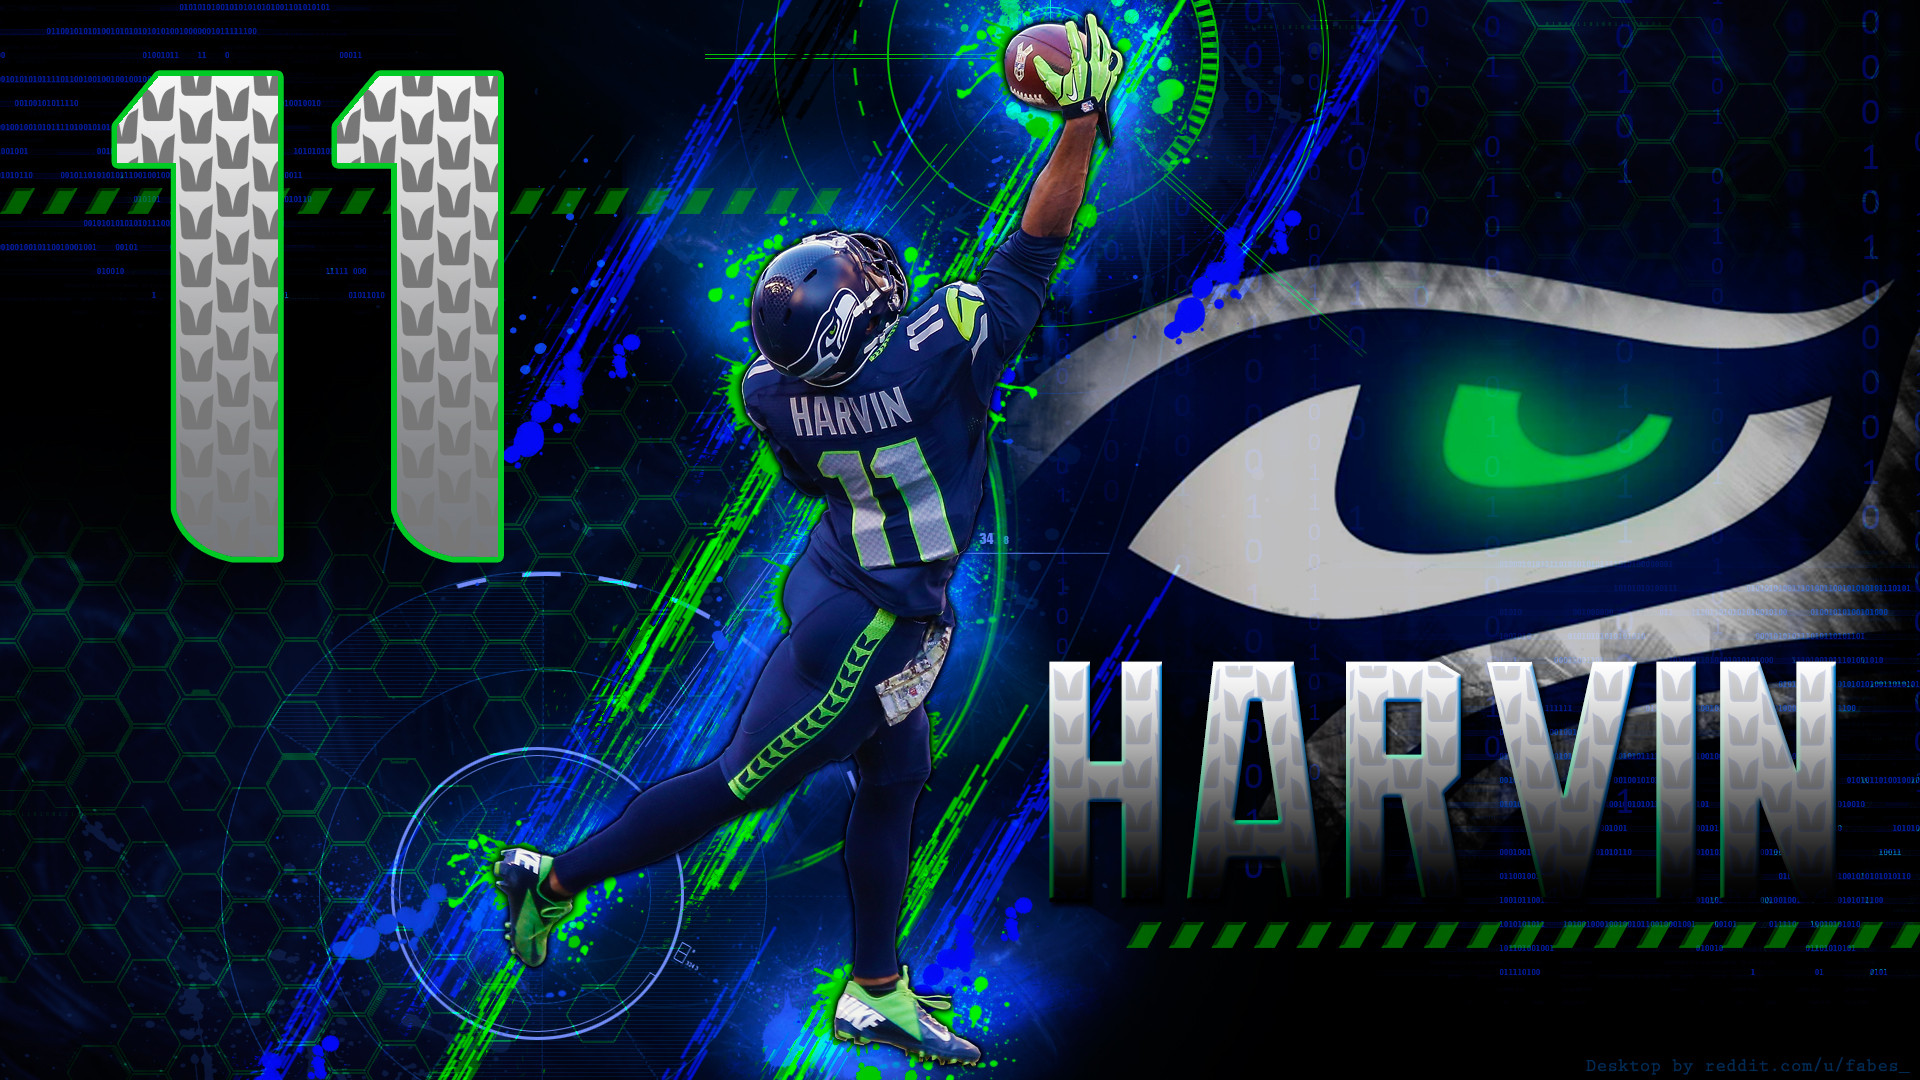 Collection of Seahawks Wallpapers Seahawks